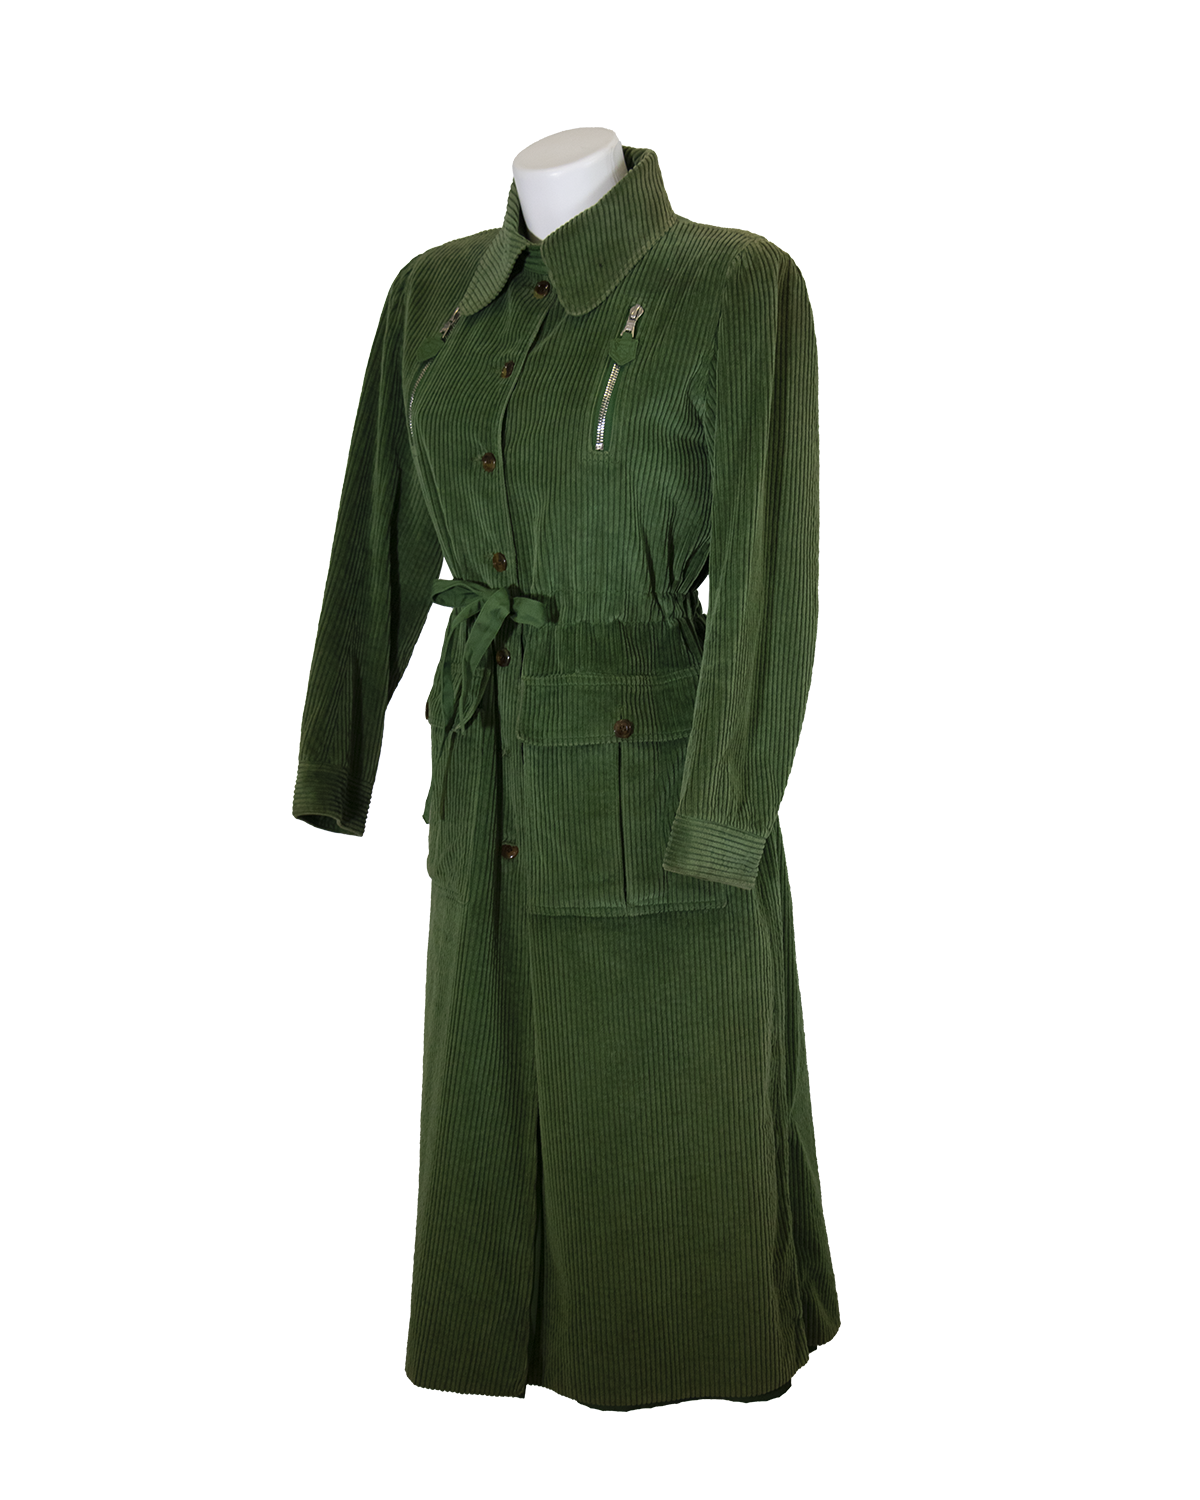 Green Coat from 1970s André Courrèges | The Secret Archive